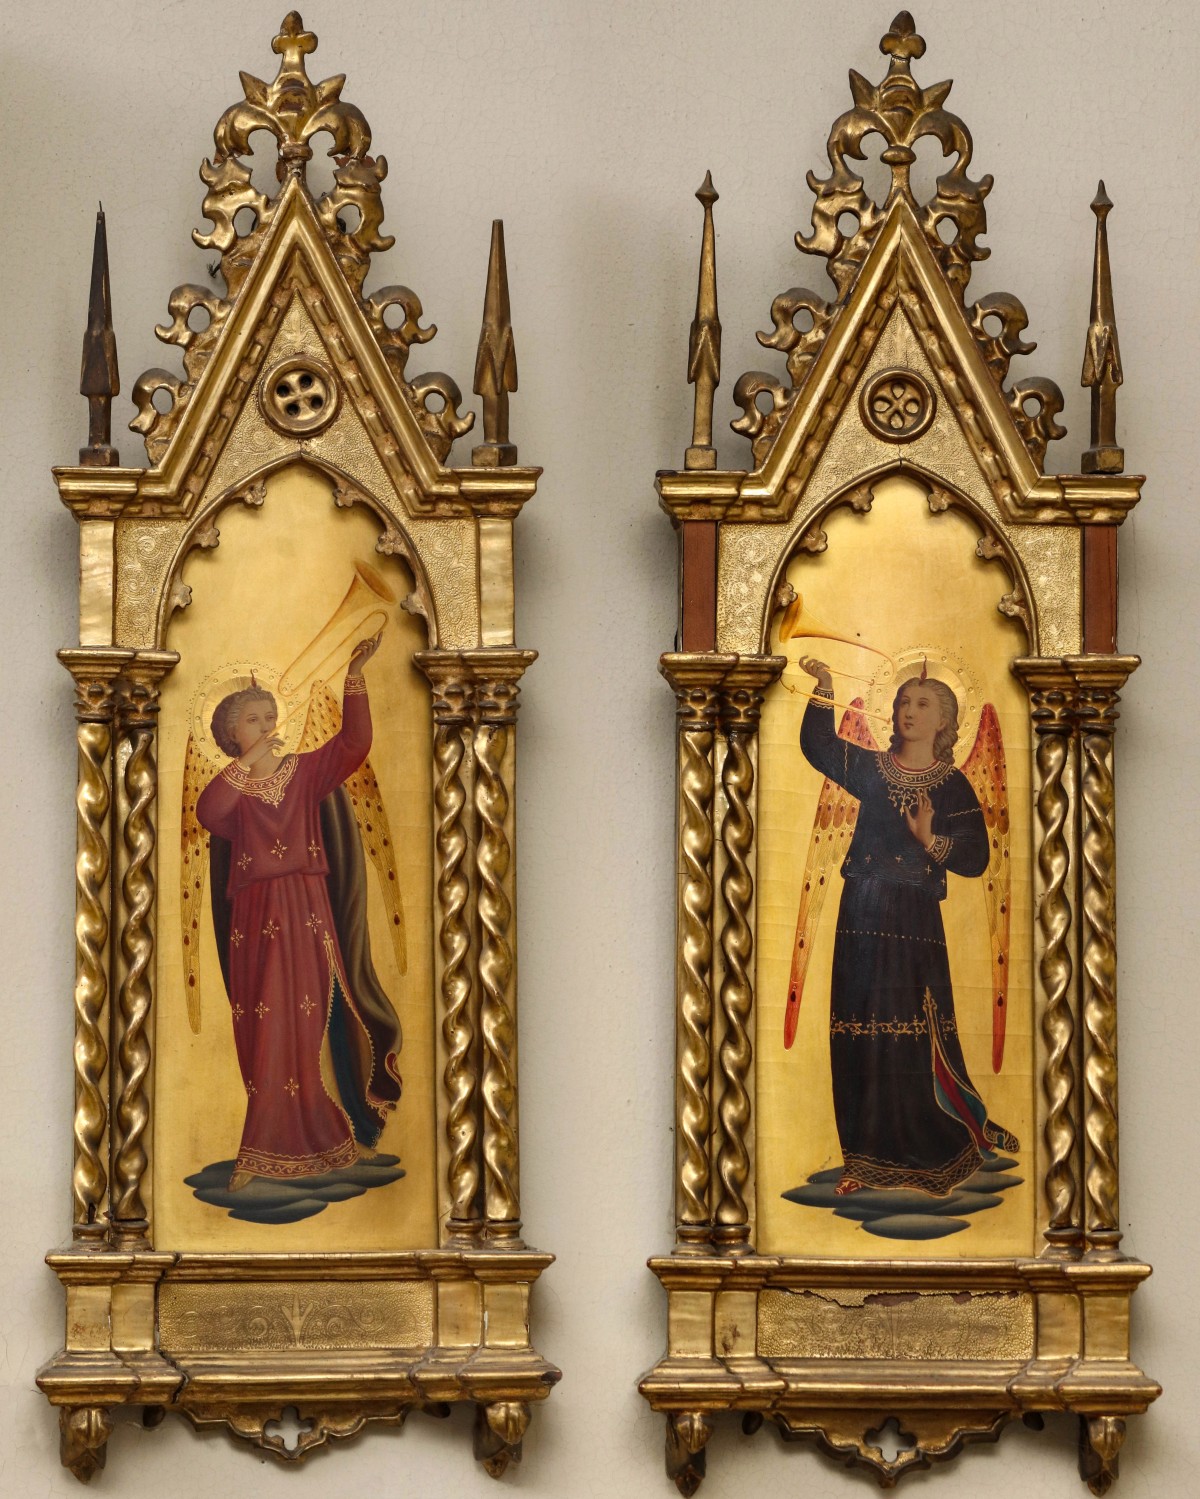 TWO GRAND TOUR PERIOD 19TH C. WORKS AFTER FRA ANGELICO